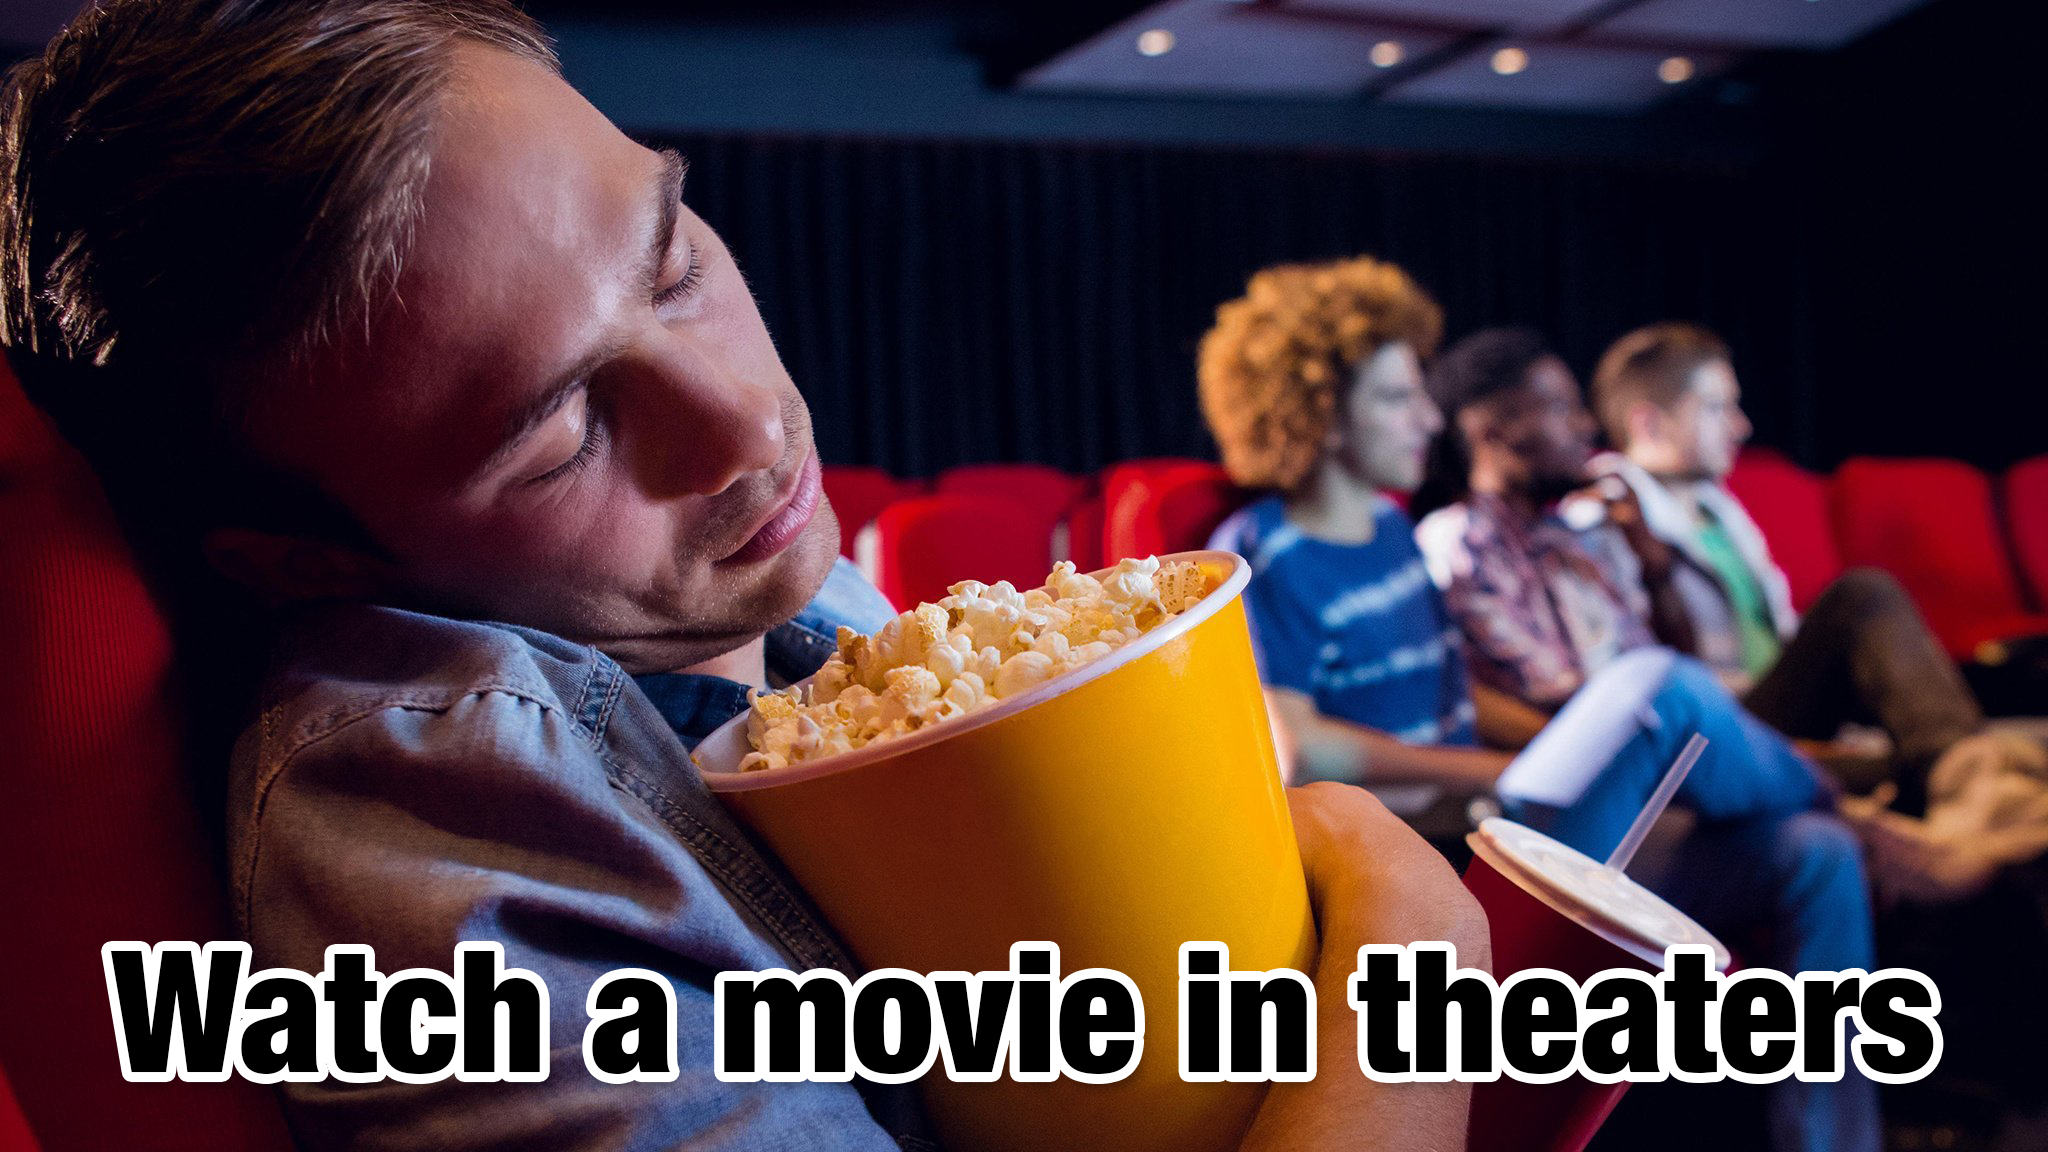 cool pics - Watch a movie in theaters